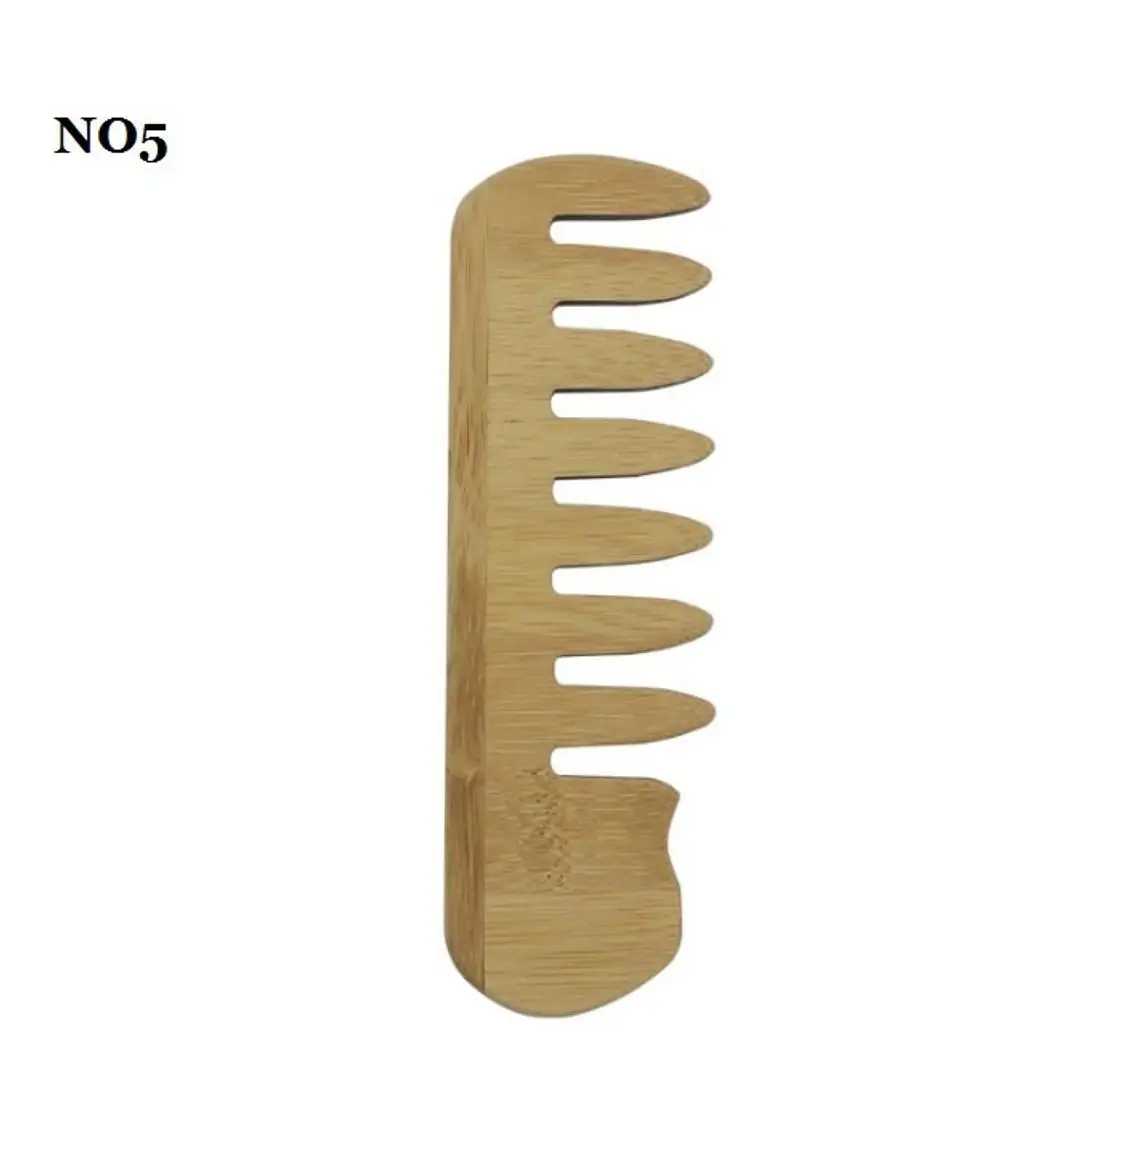 Afro Comb Bamboo Comb Wide Tooth Beard Care Comb Fork Combs Pick Comb Hair Brush